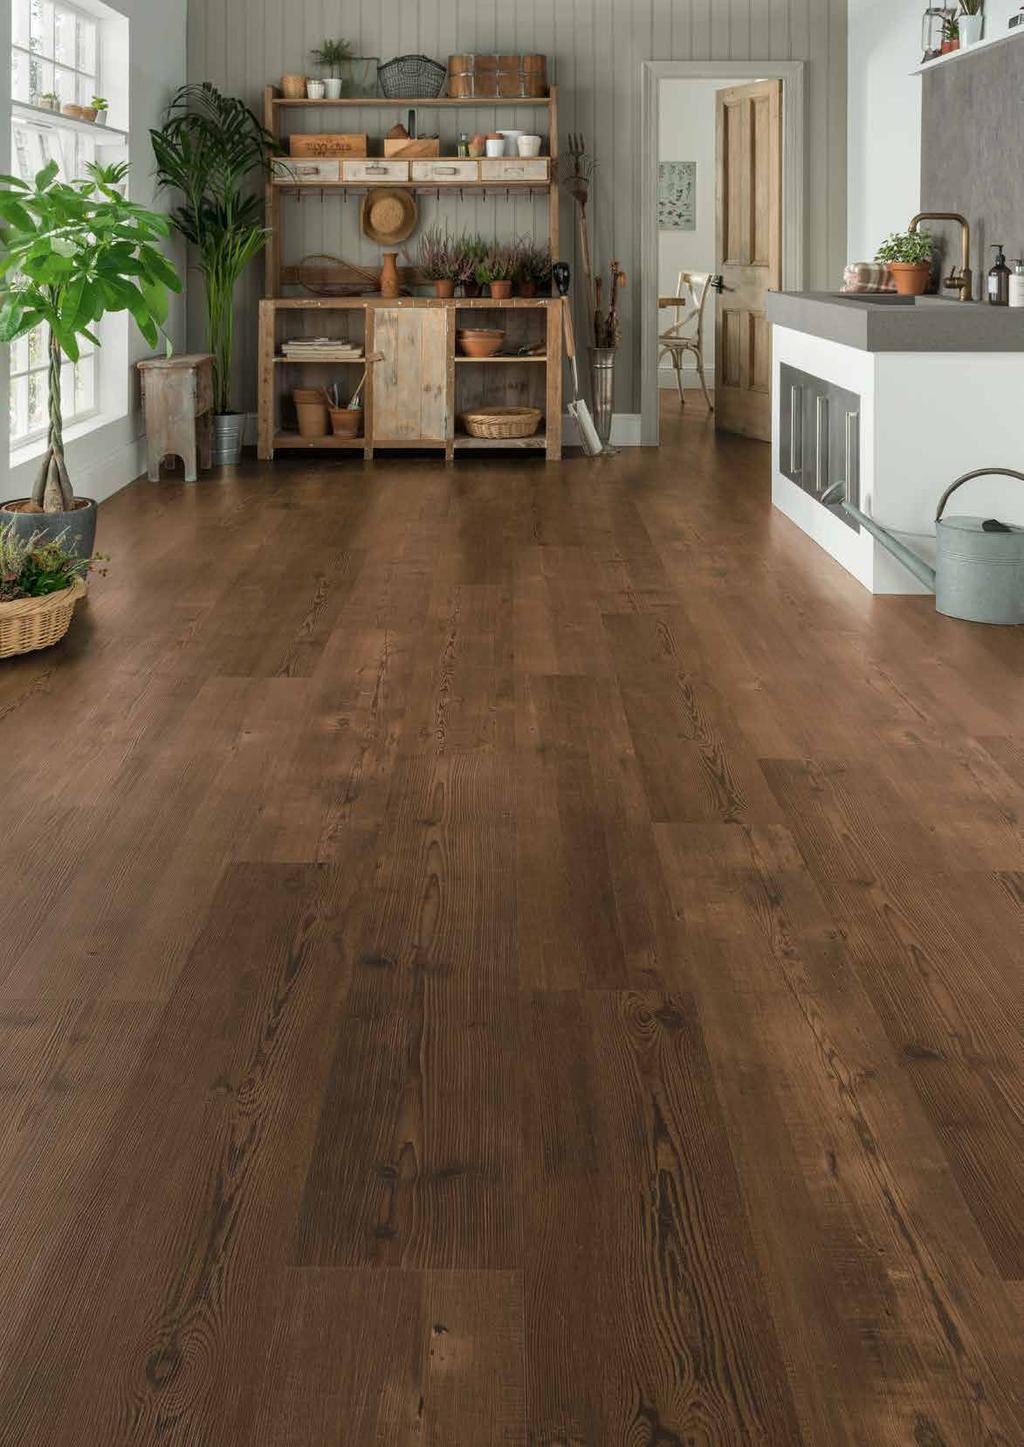 The aged finished of Antique Heart Pine helps to establish opulence